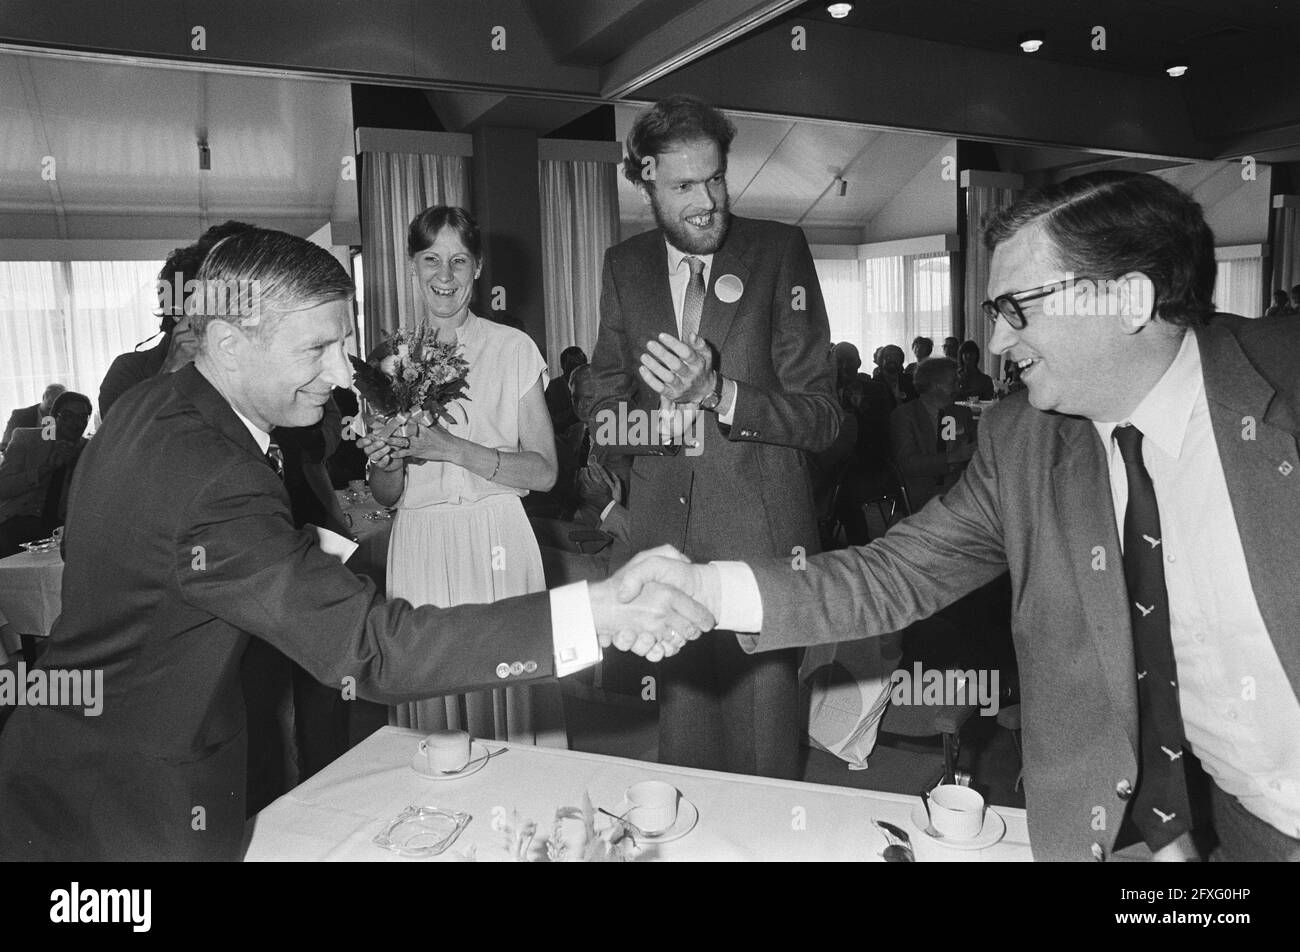 Van Agt house keys to 50,000th resident of Lelystad; Van Agt congratulates mayor Gruyters, Visser couple (49,999 and 50,000th residents), June 30, 1982, mayors, couples, house keys, handovers, The Netherlands, 20th century press agency photo, news to remember, documentary, historic photography 1945-1990, visual stories, human history of the Twentieth Century, capturing moments in time Stock Photo